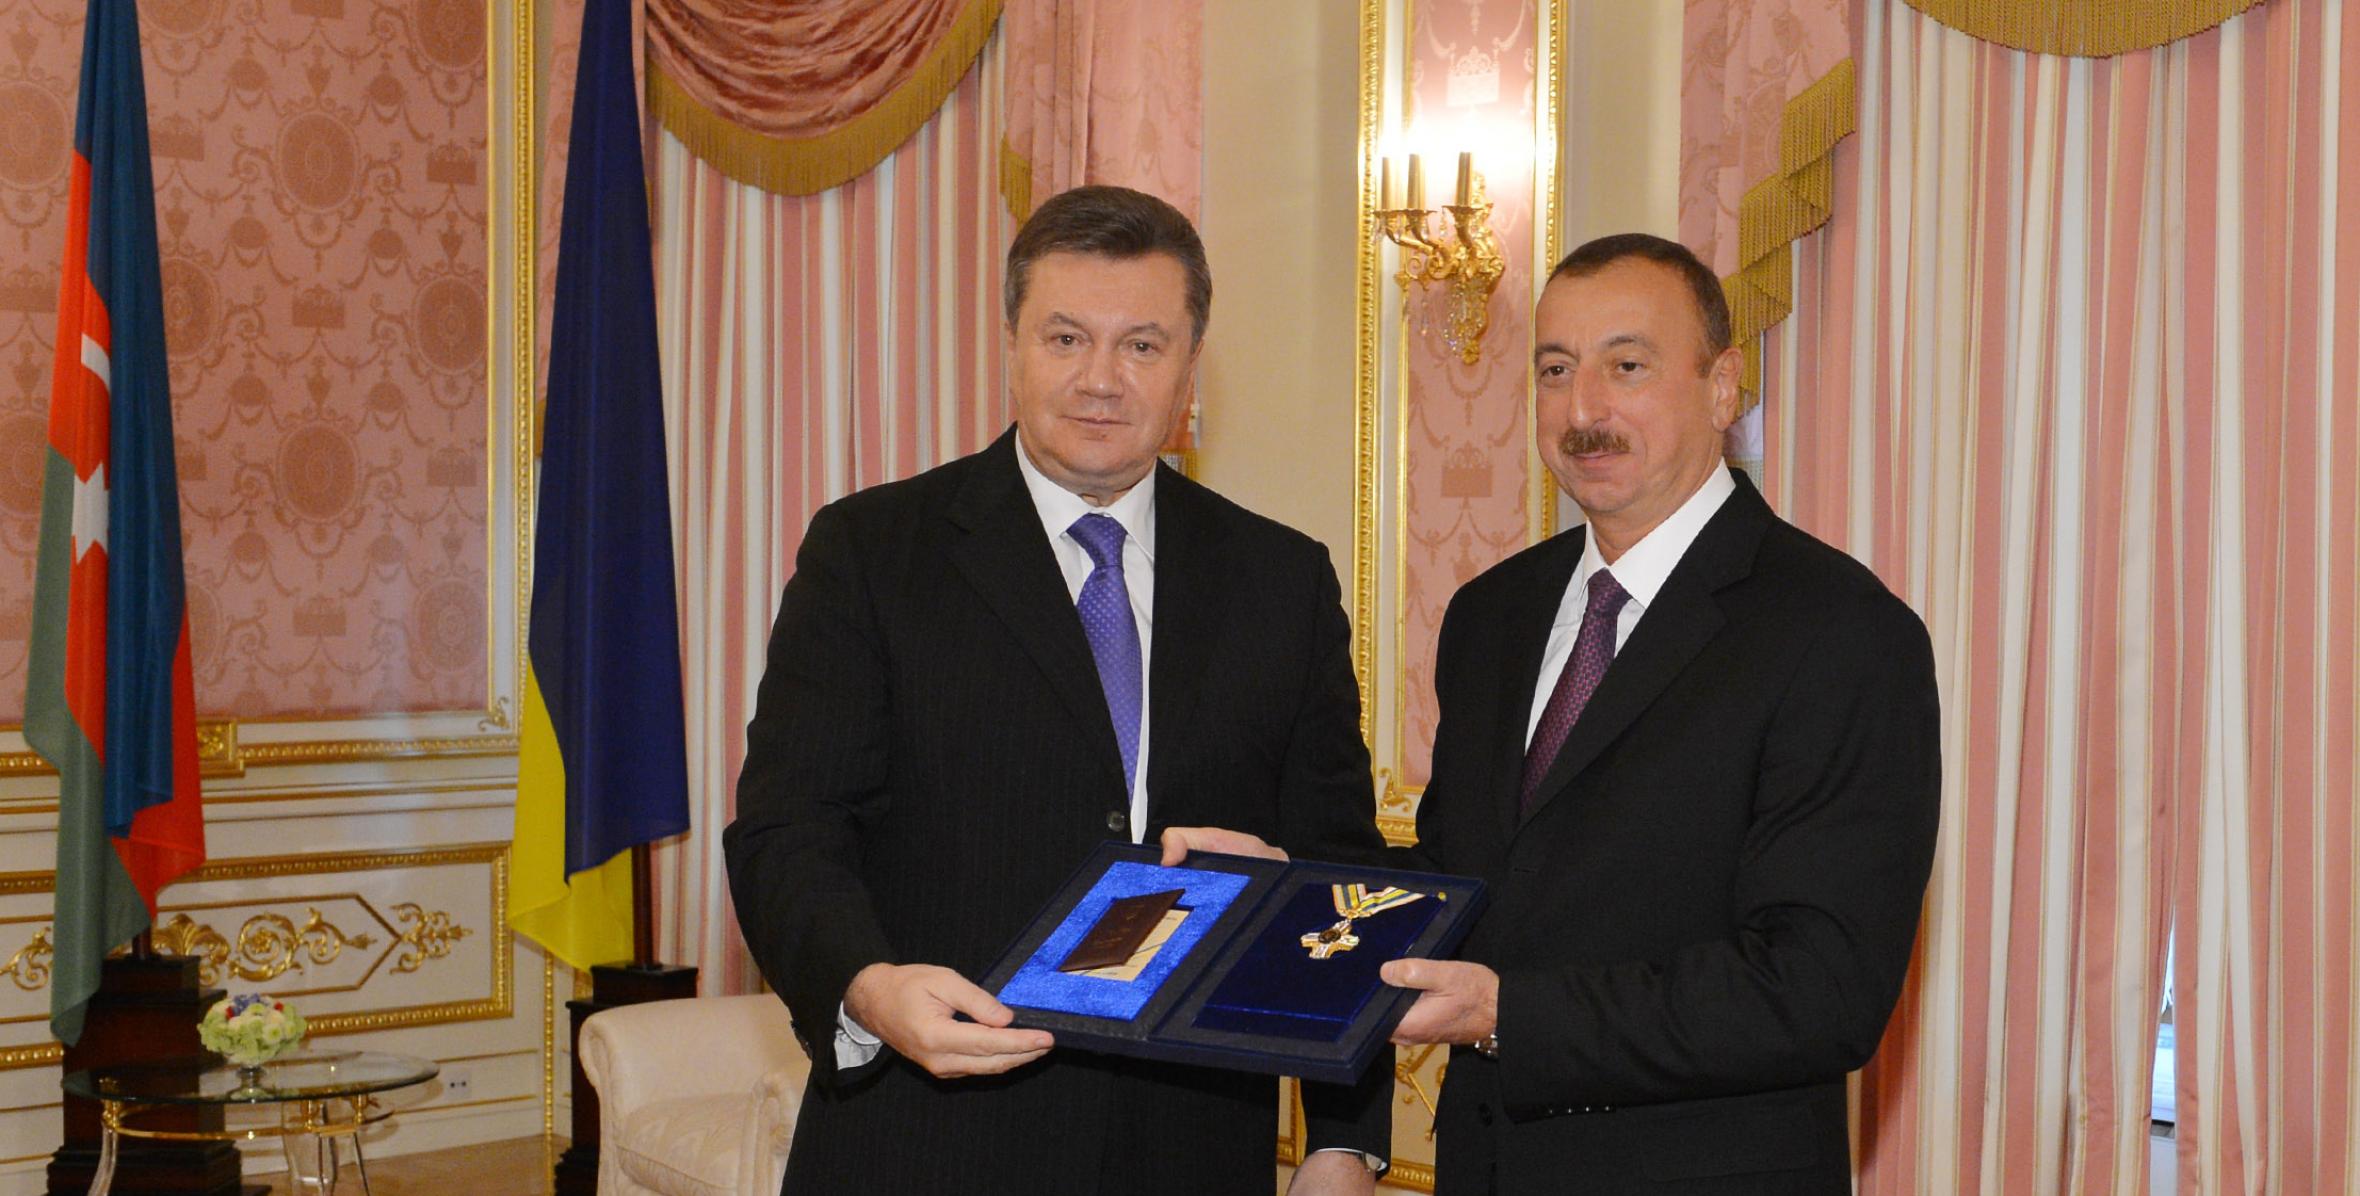 A ceremony has been held to decorate the Presidents of Azerbaijan and Ukraine